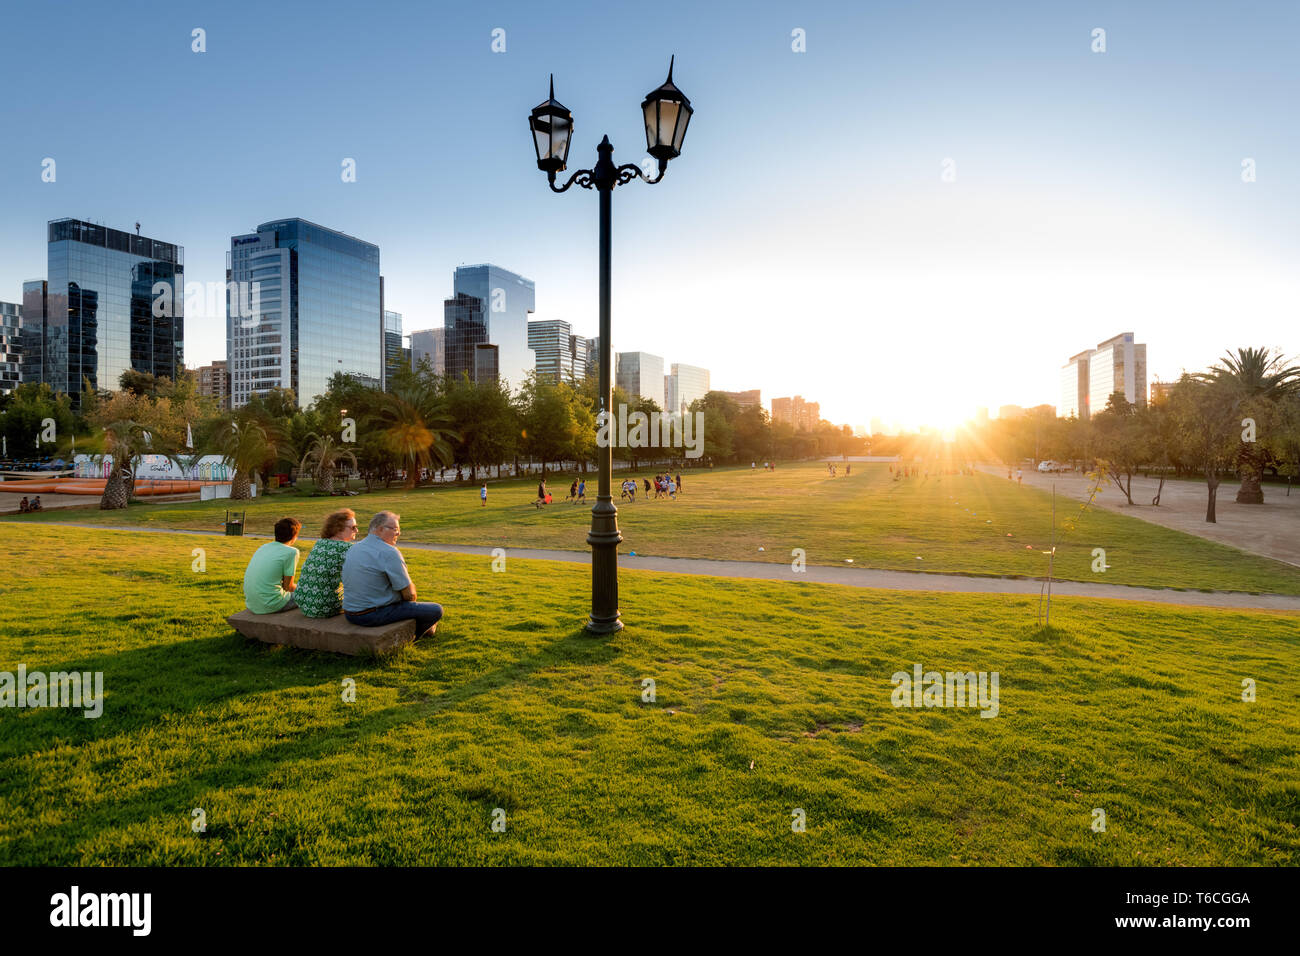 Santiago, Region Metropolitana, Chile - January 17, 2019: People watching the sunset at Parque Araucano, the main park in Las Condes district, surroun Stock Photo